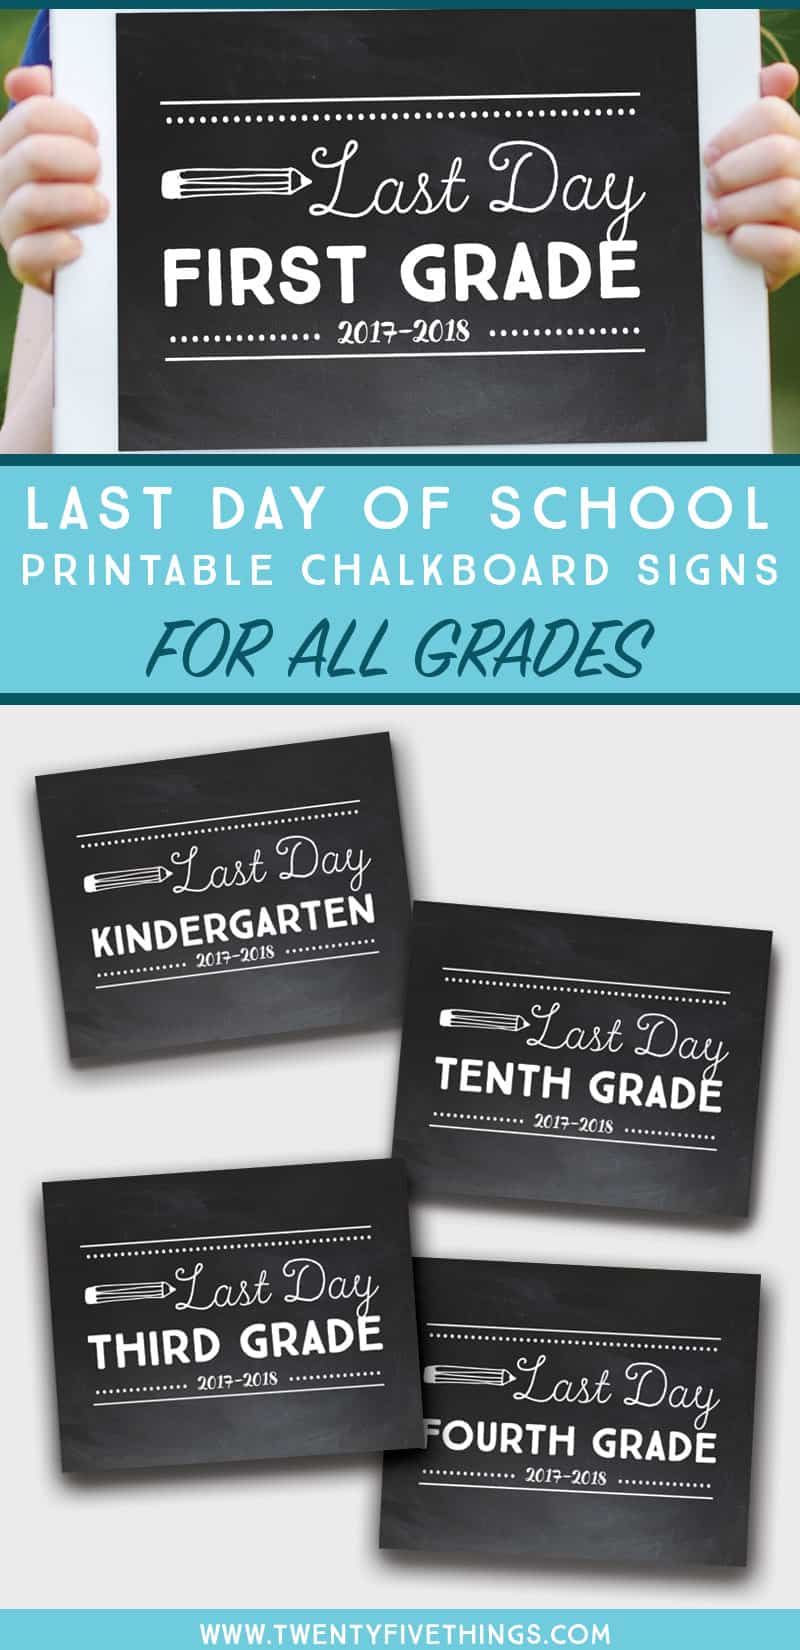 last-day-of-school-chalkboard-signs-free-printables-for-every-grade